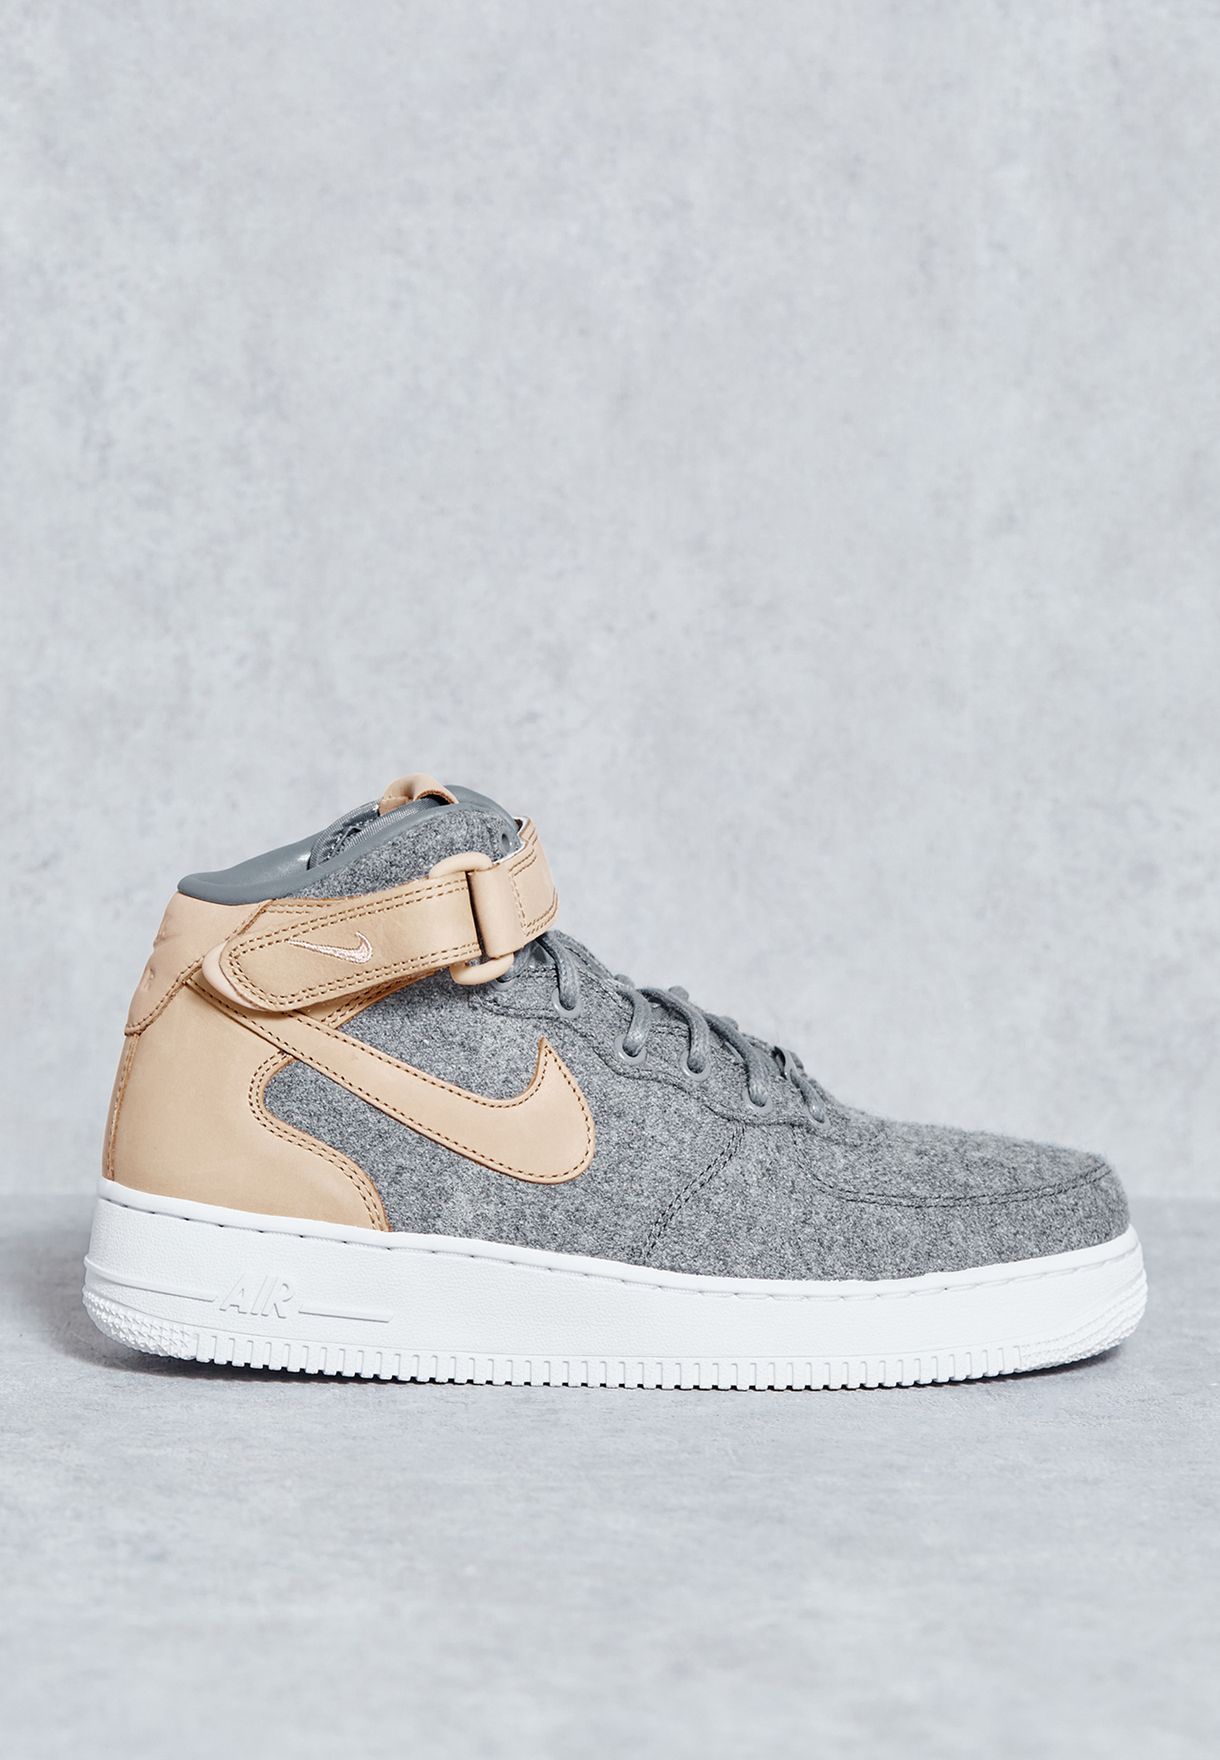 nike air force 1 07 mid leather premium women's shoe